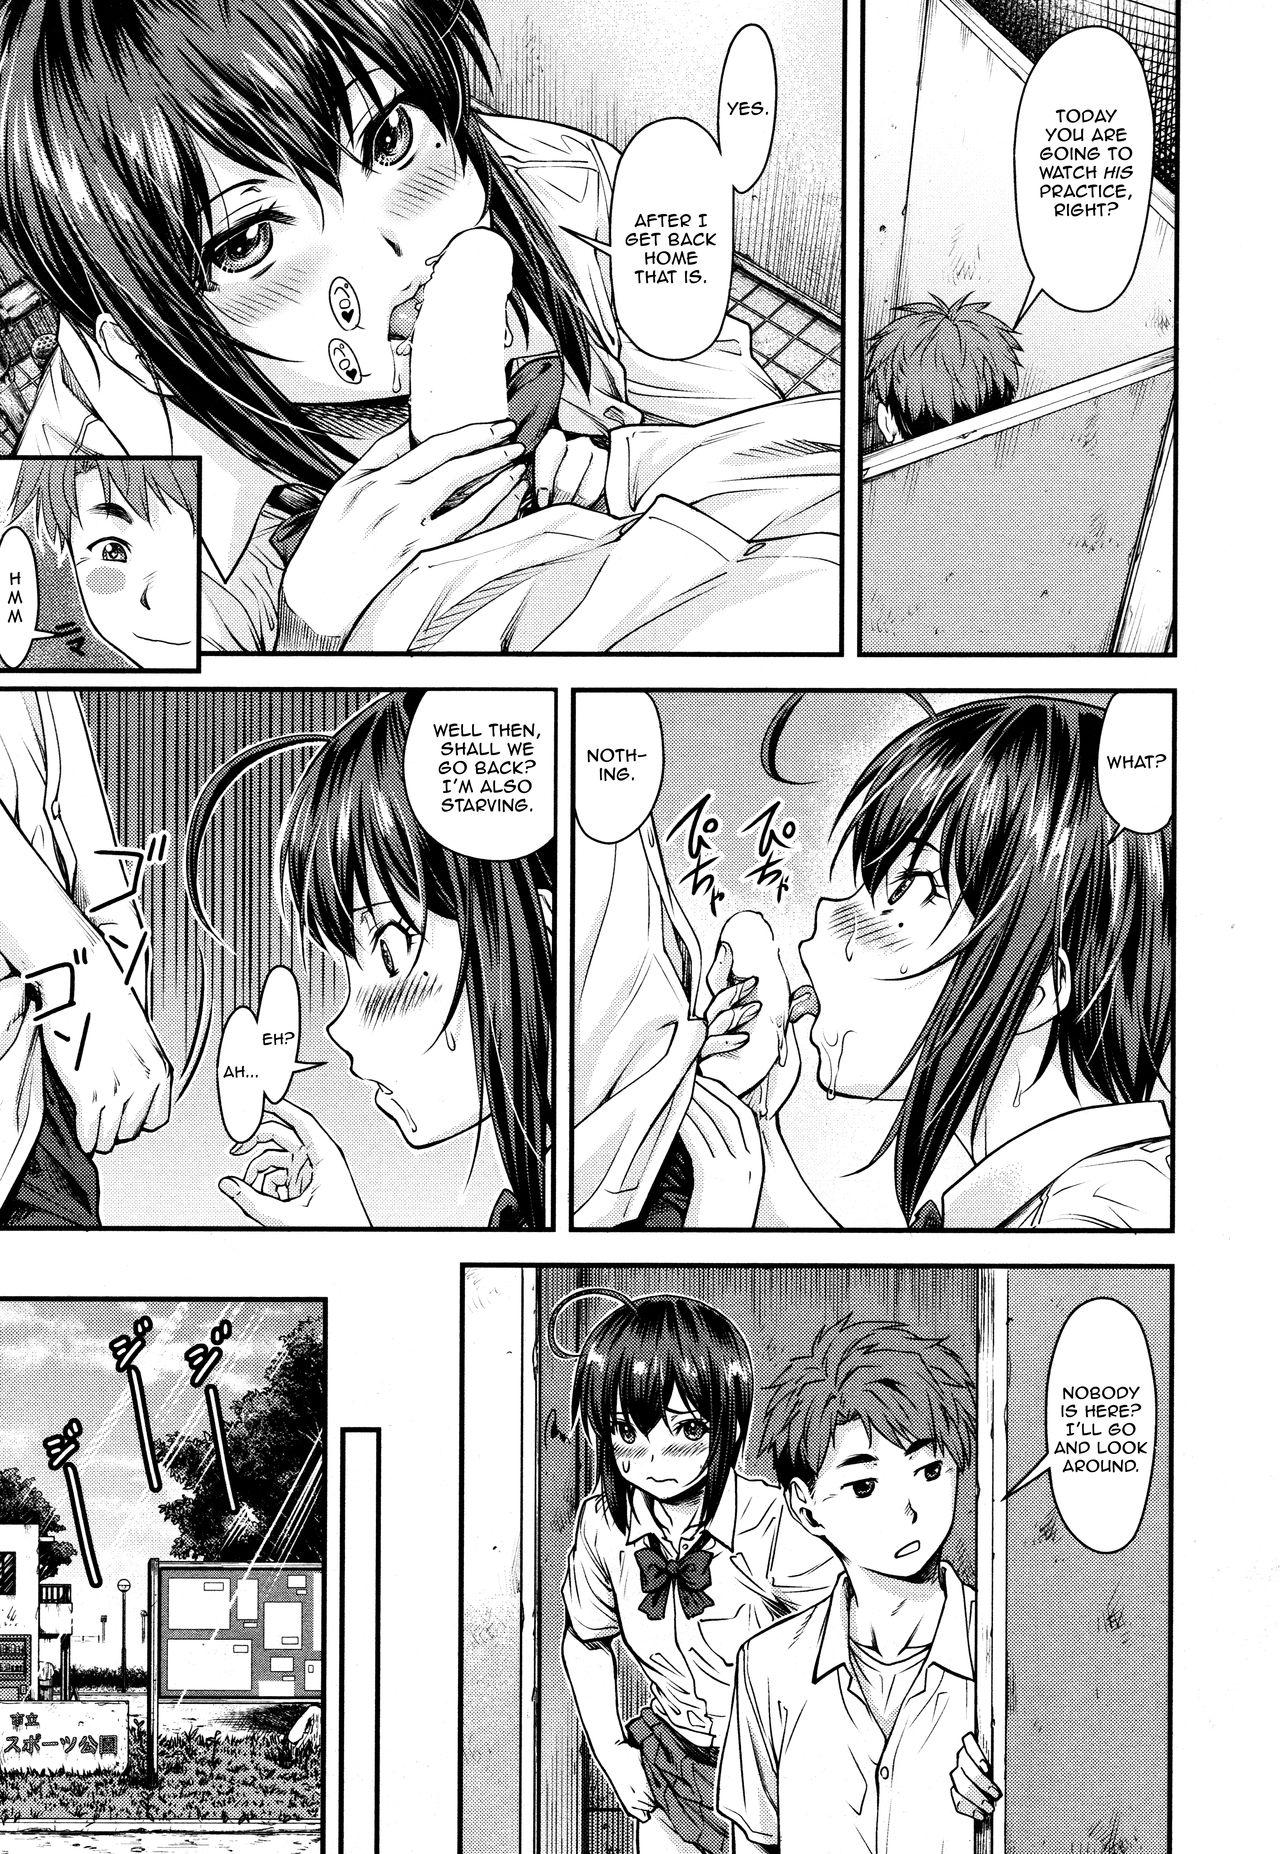 Asses Kaname Date #10 Dicks - Page 5